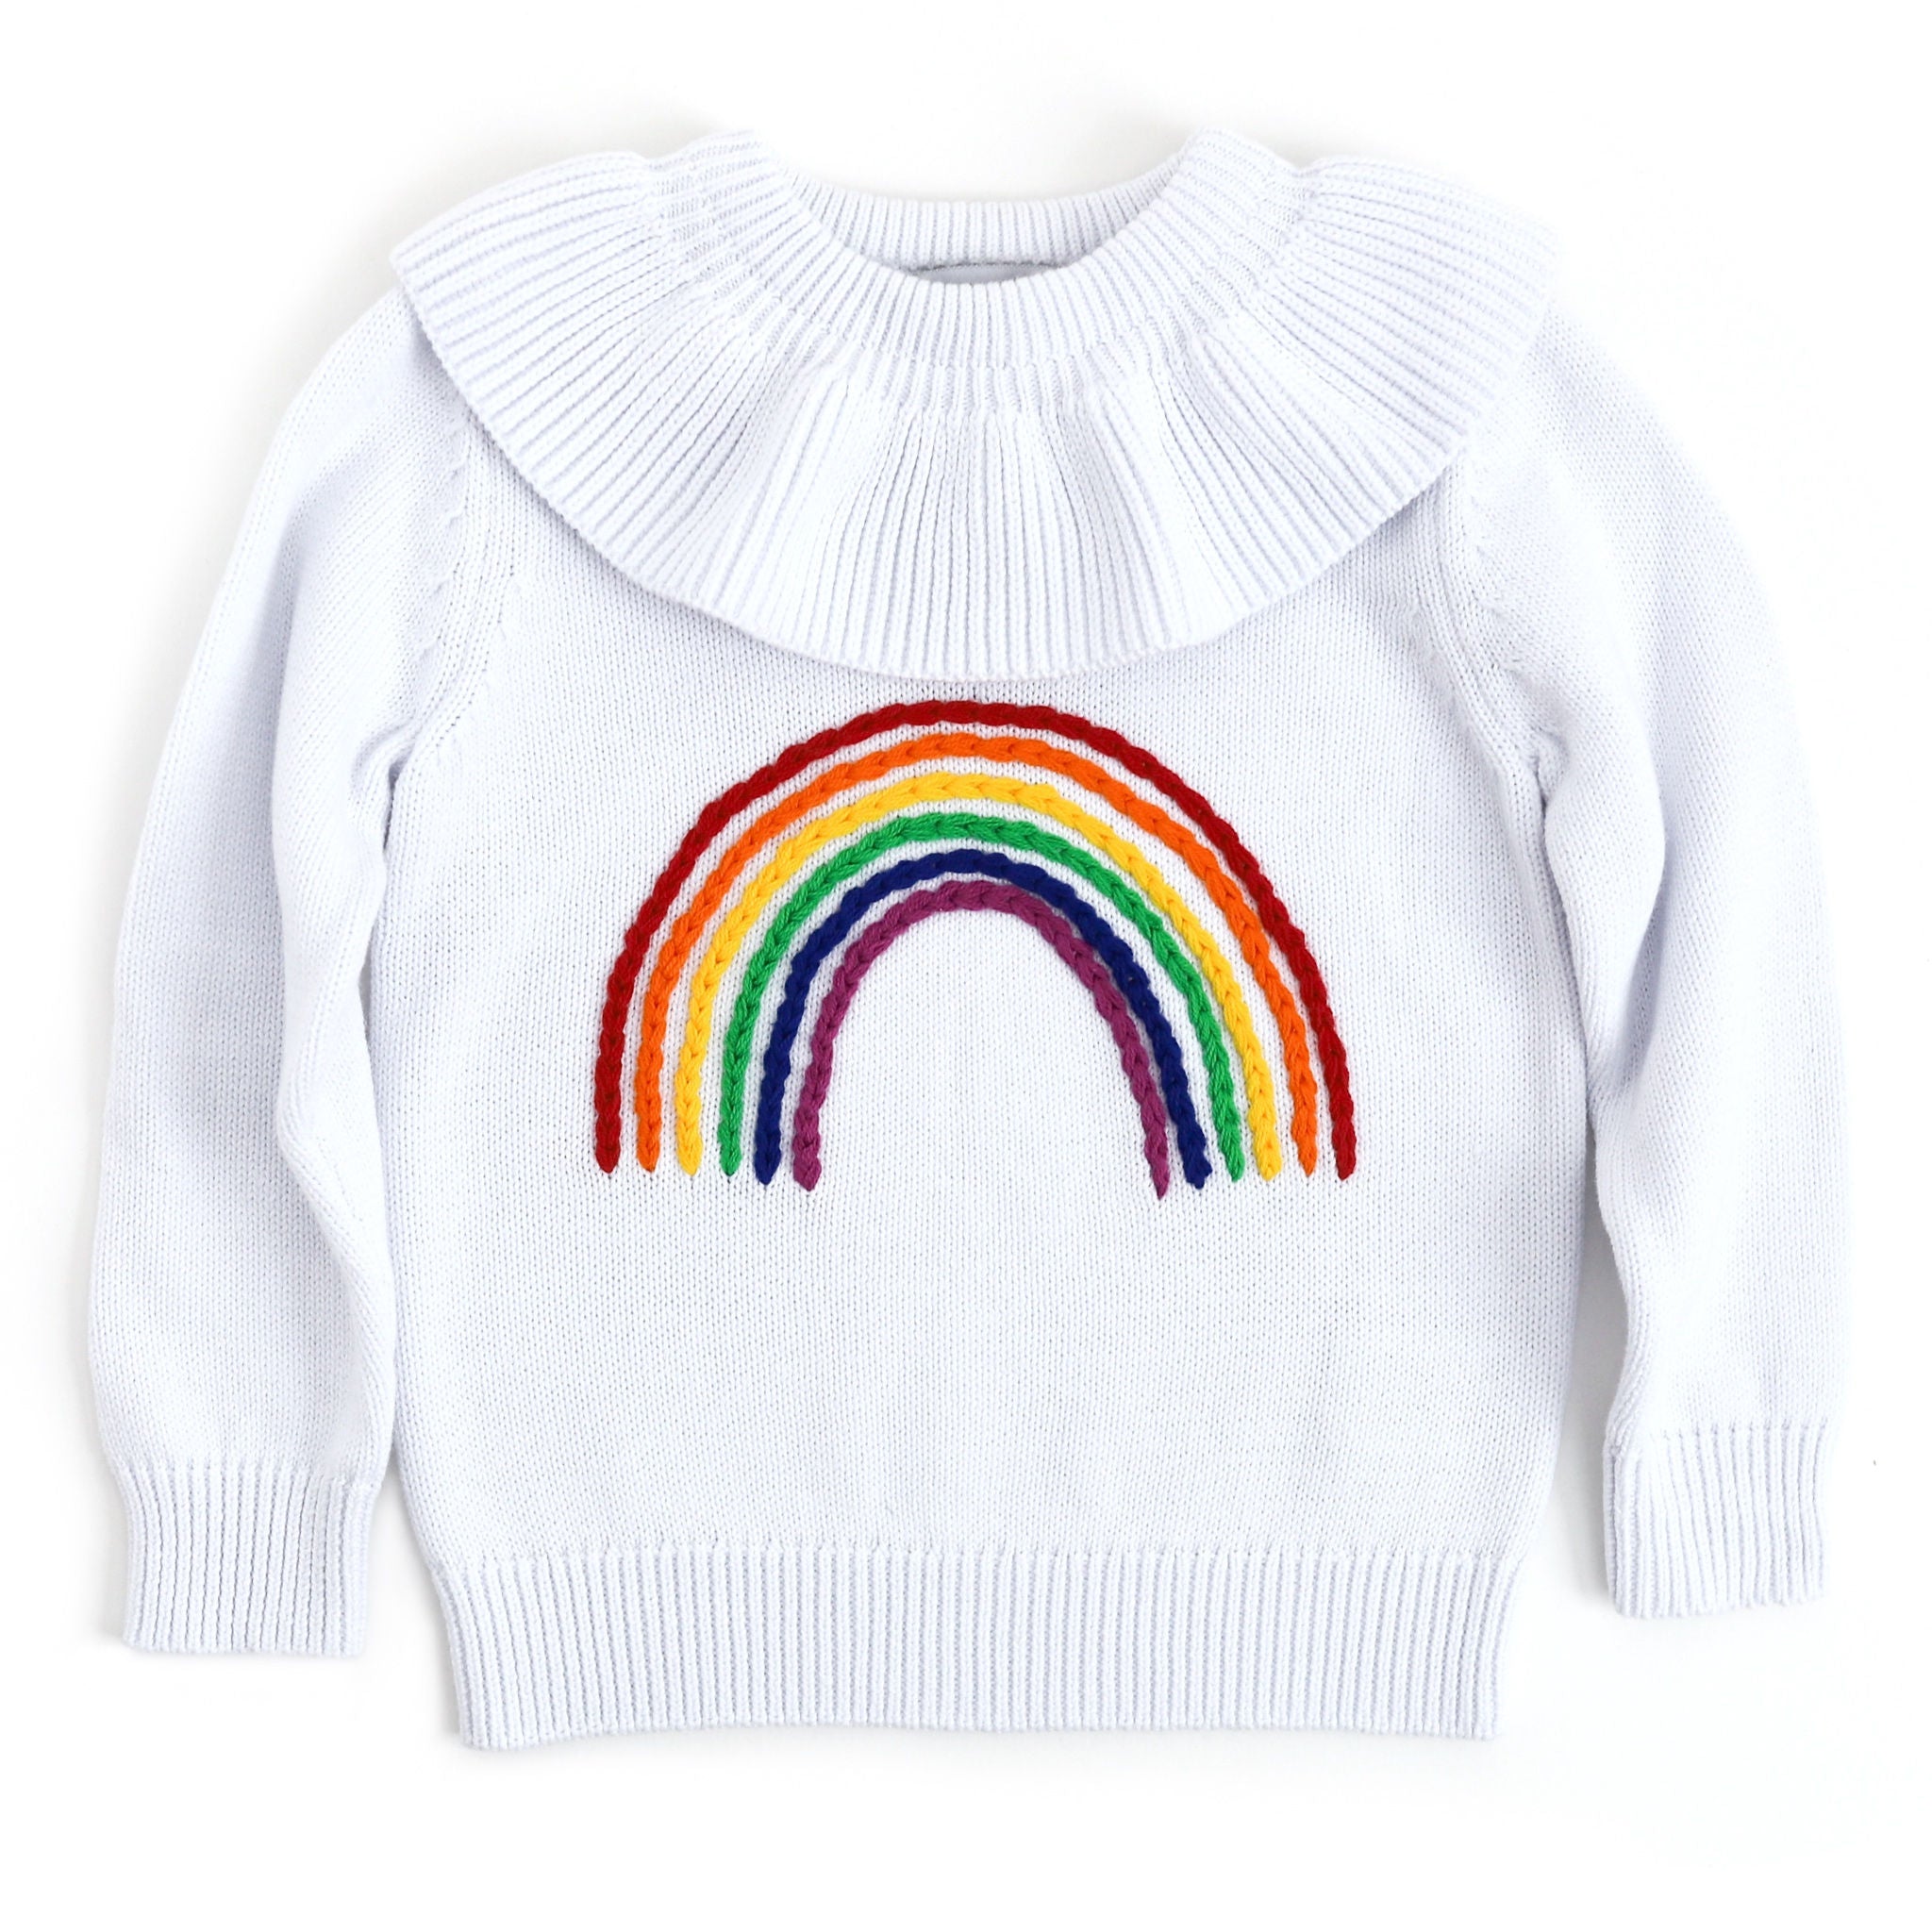 kids white knit sweater with ruffle collar and embroidered rainbow design on front